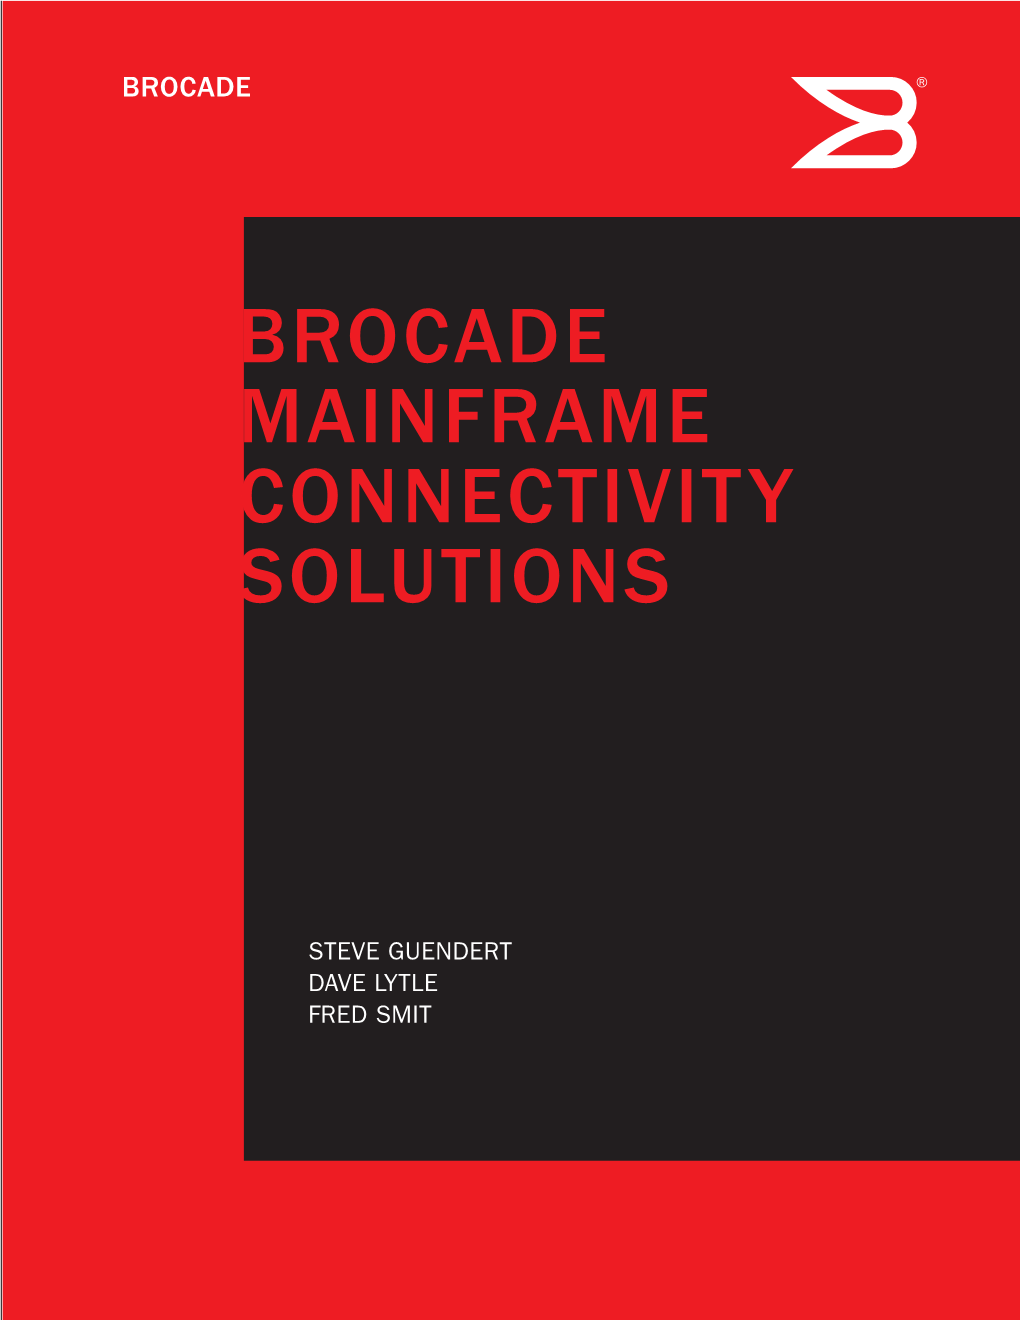 Brocade Mainframe Connectivity Solutions